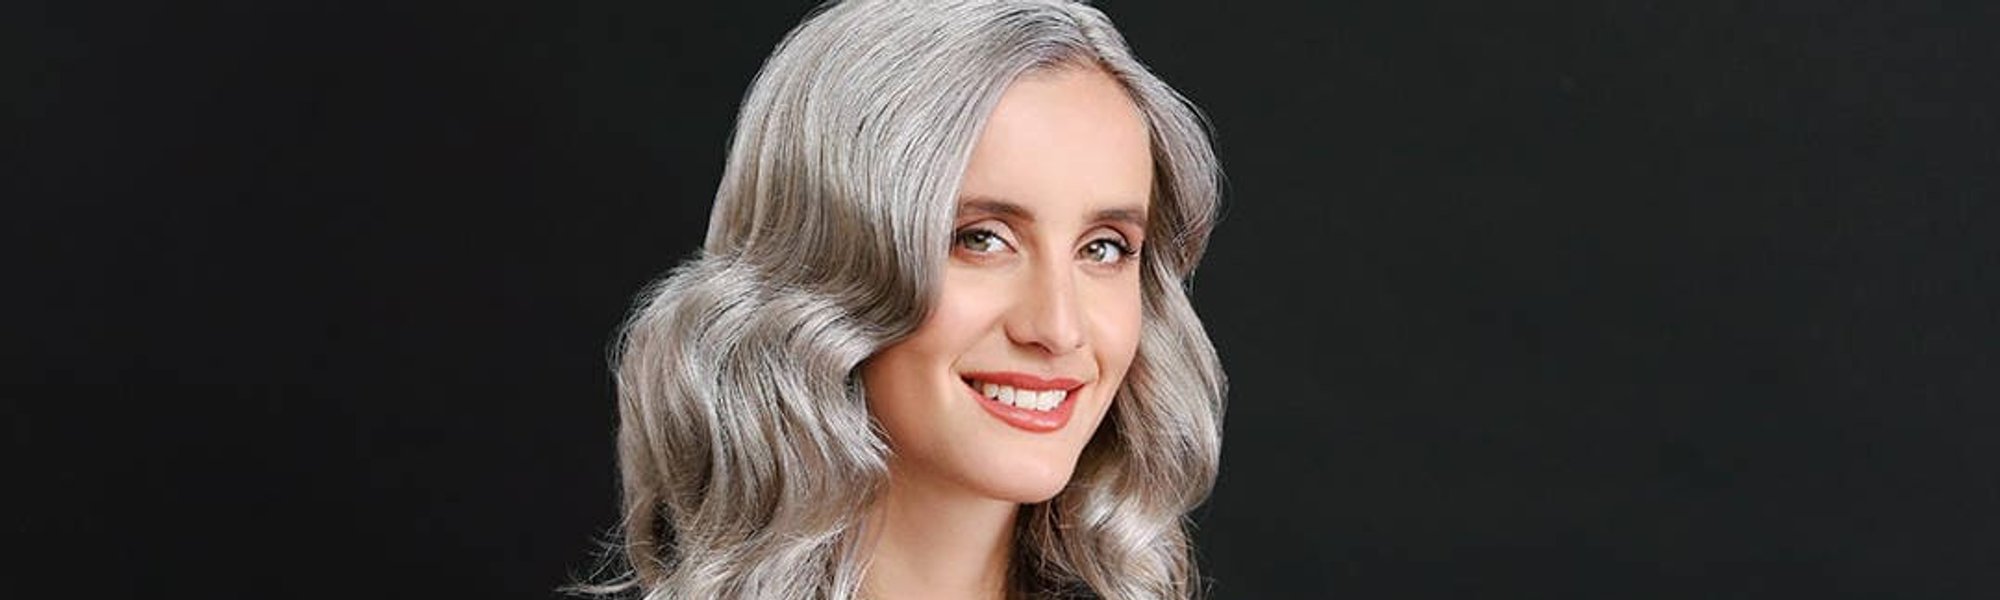 Trending Now Preference Silver Hair 1080x476